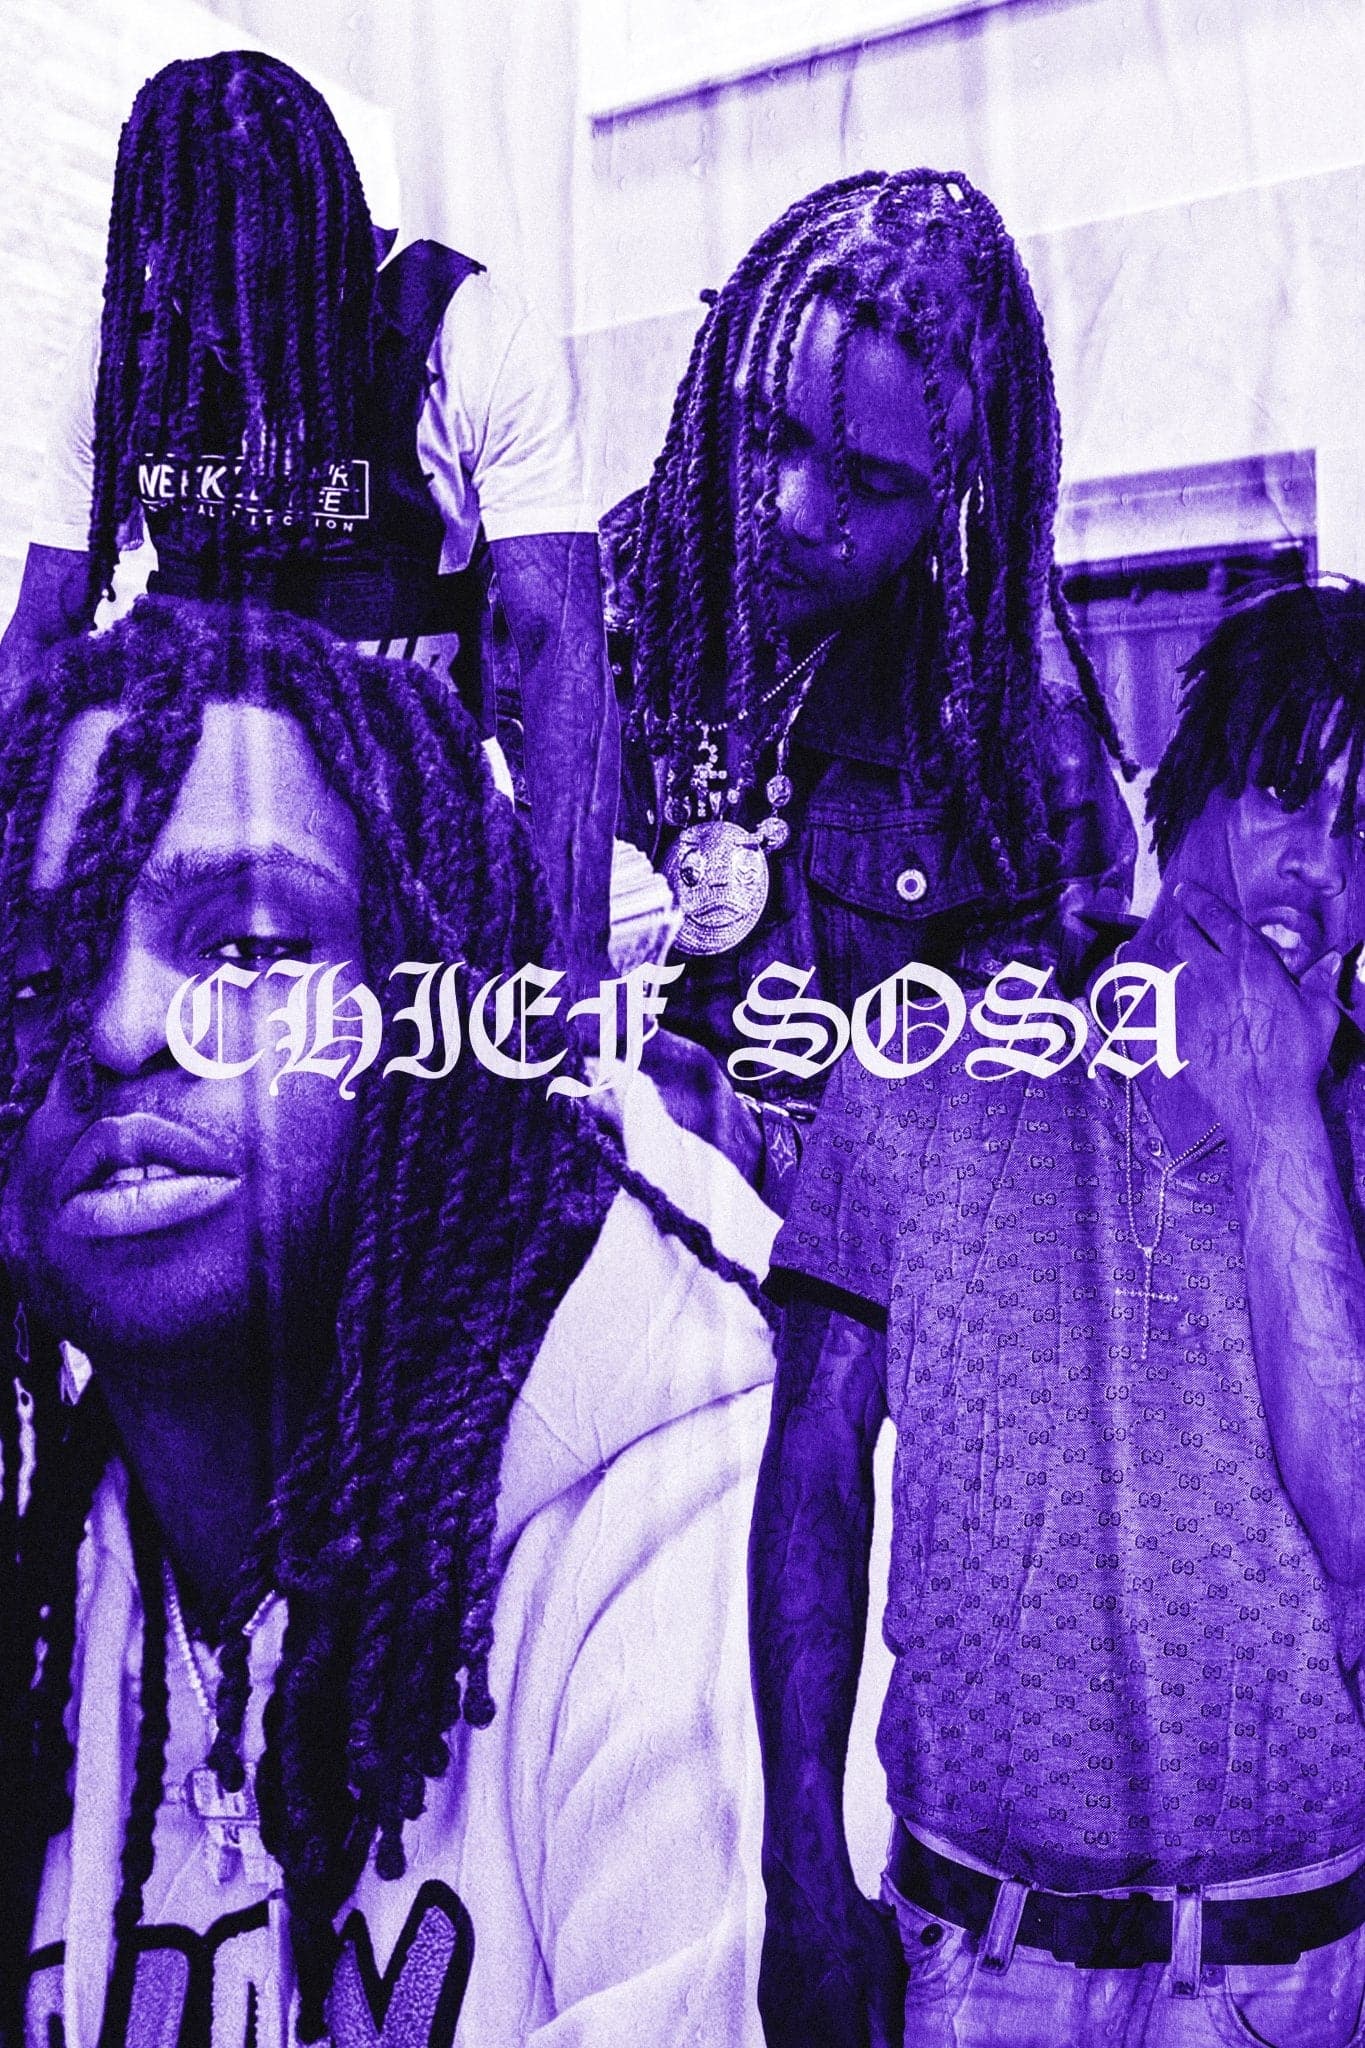 Cheif Keef 'Chief Sosa' Poster - Posters Plug